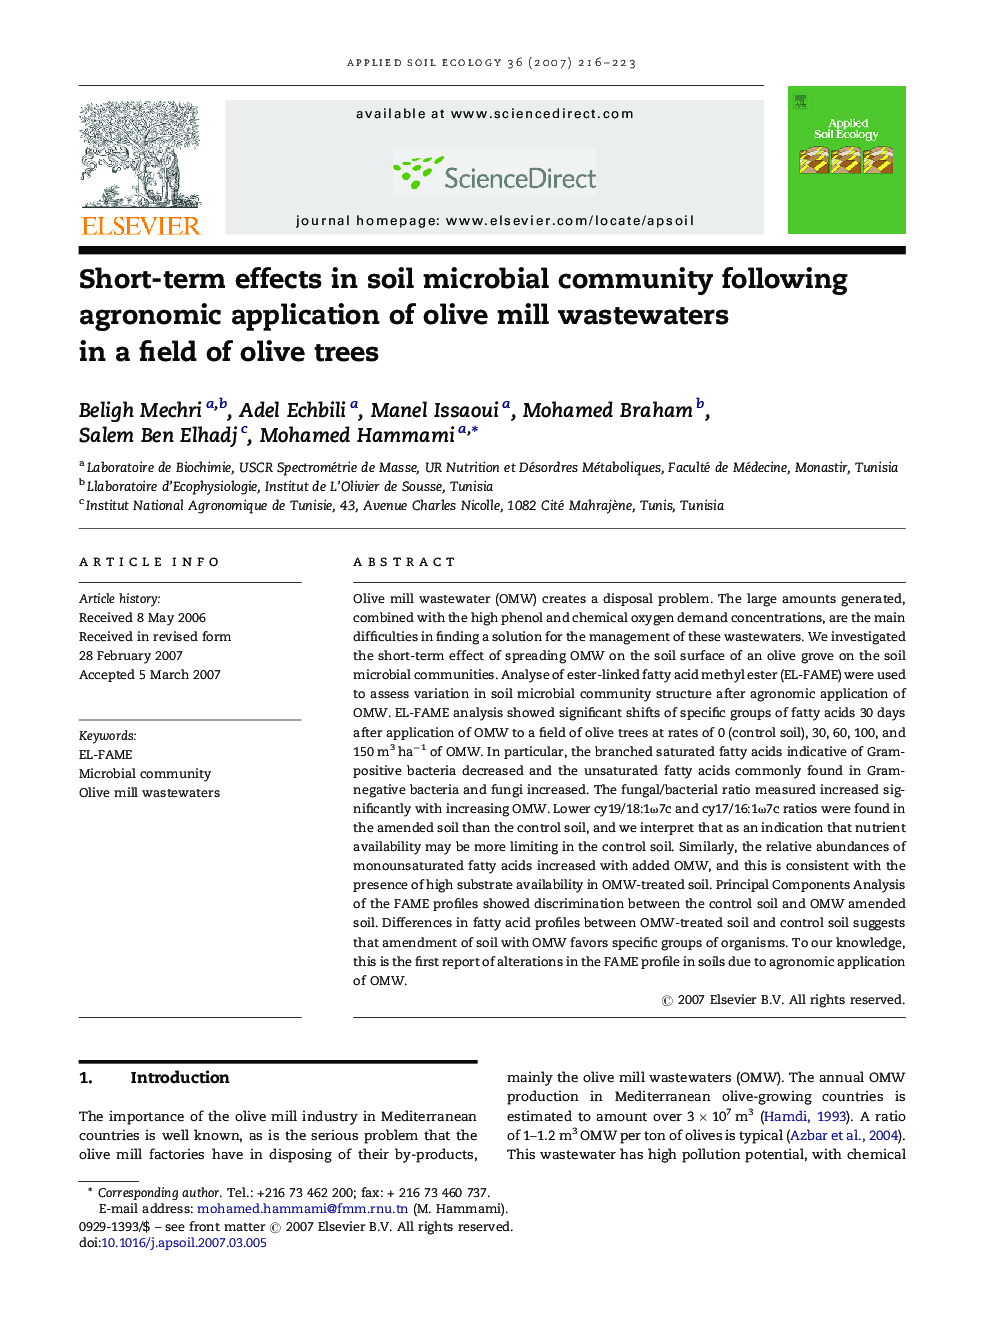 Short-term effects in soil microbial community following agronomic application of olive mill wastewaters in a field of olive trees